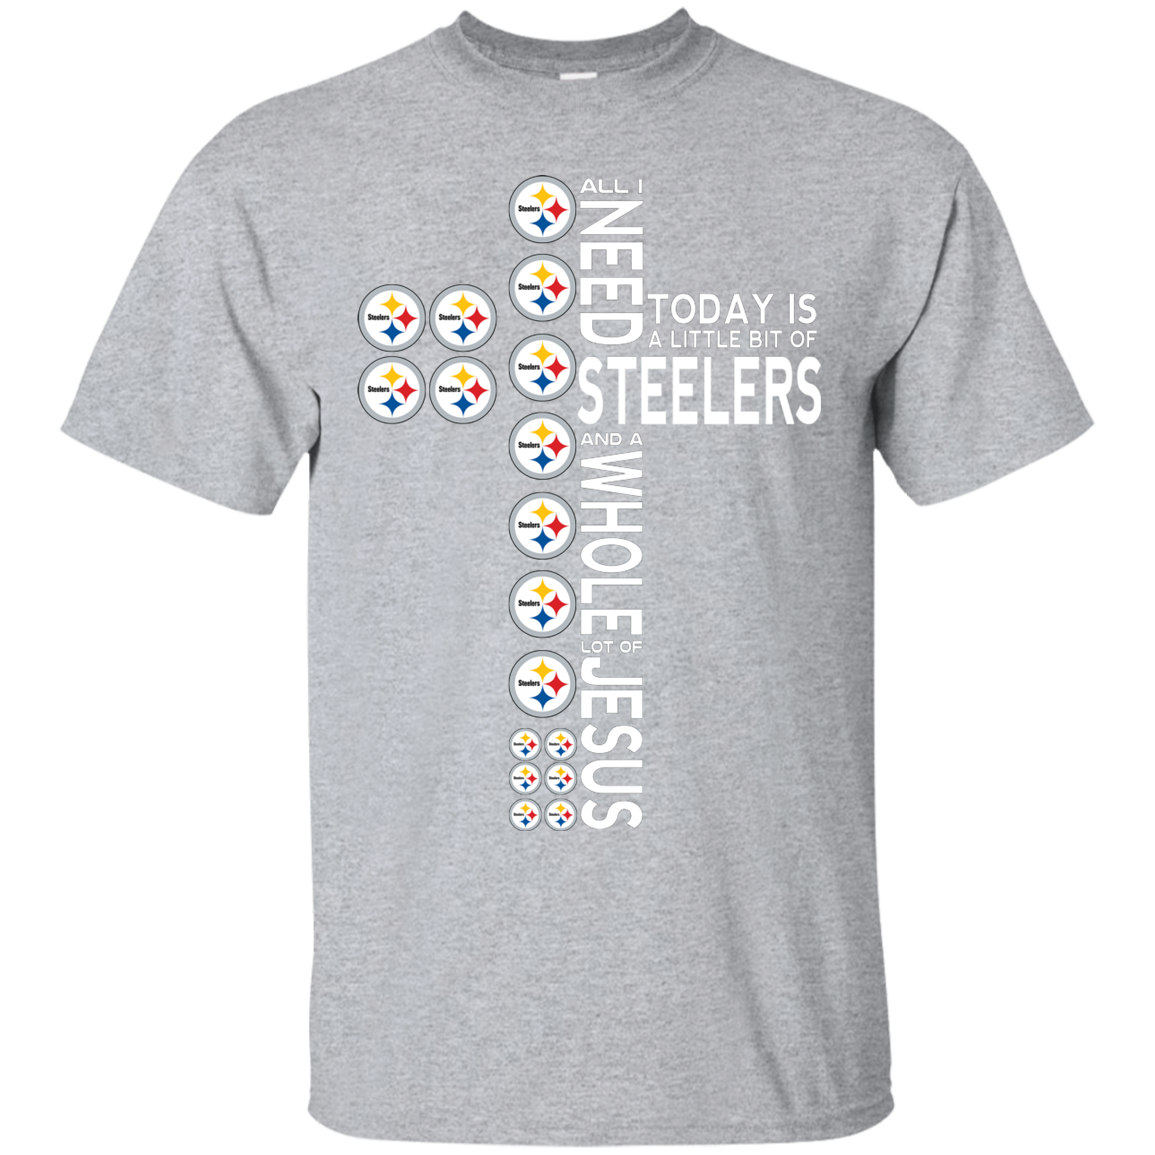 High Quality Shirt For Pittsburgh Steelers And Jesus Fans